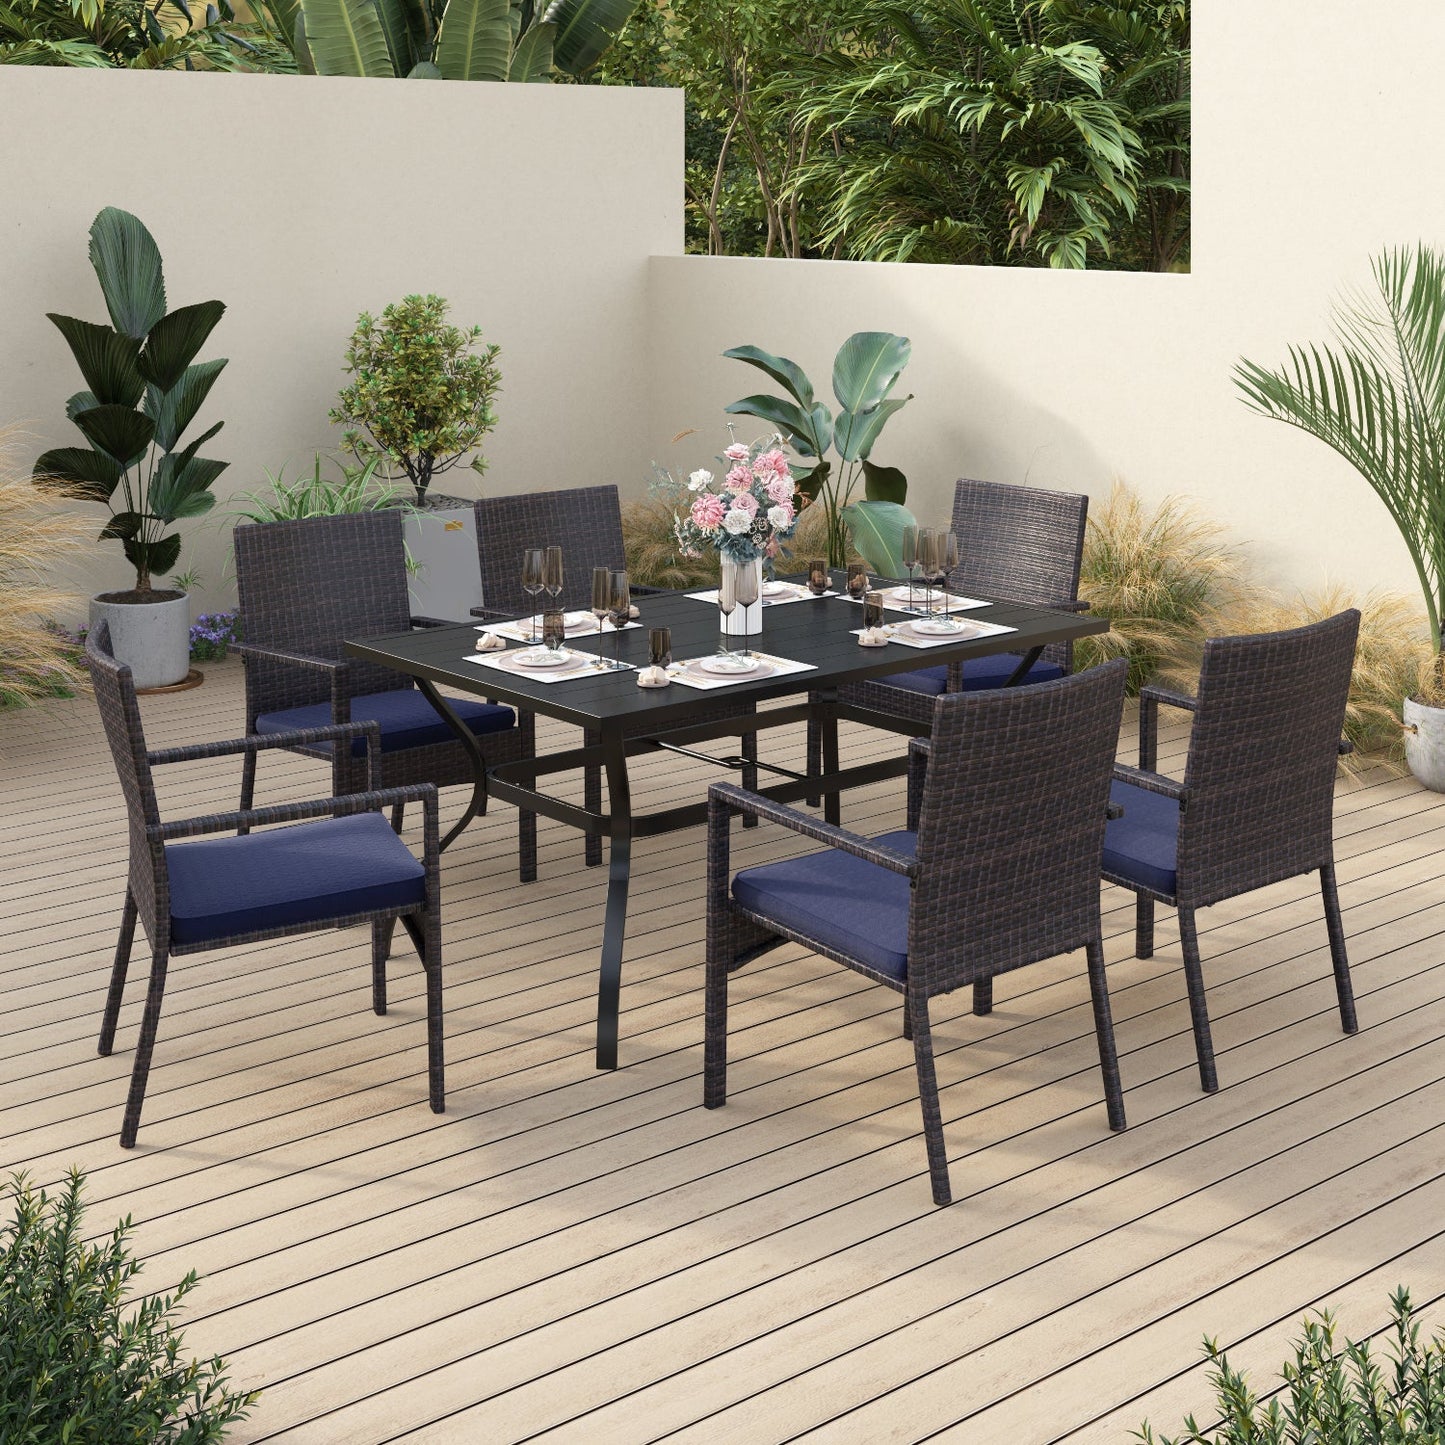 Sophia&William 7-Piece Outdoor Patio Dining Set Wicker Rattan Chairs and Steel Table